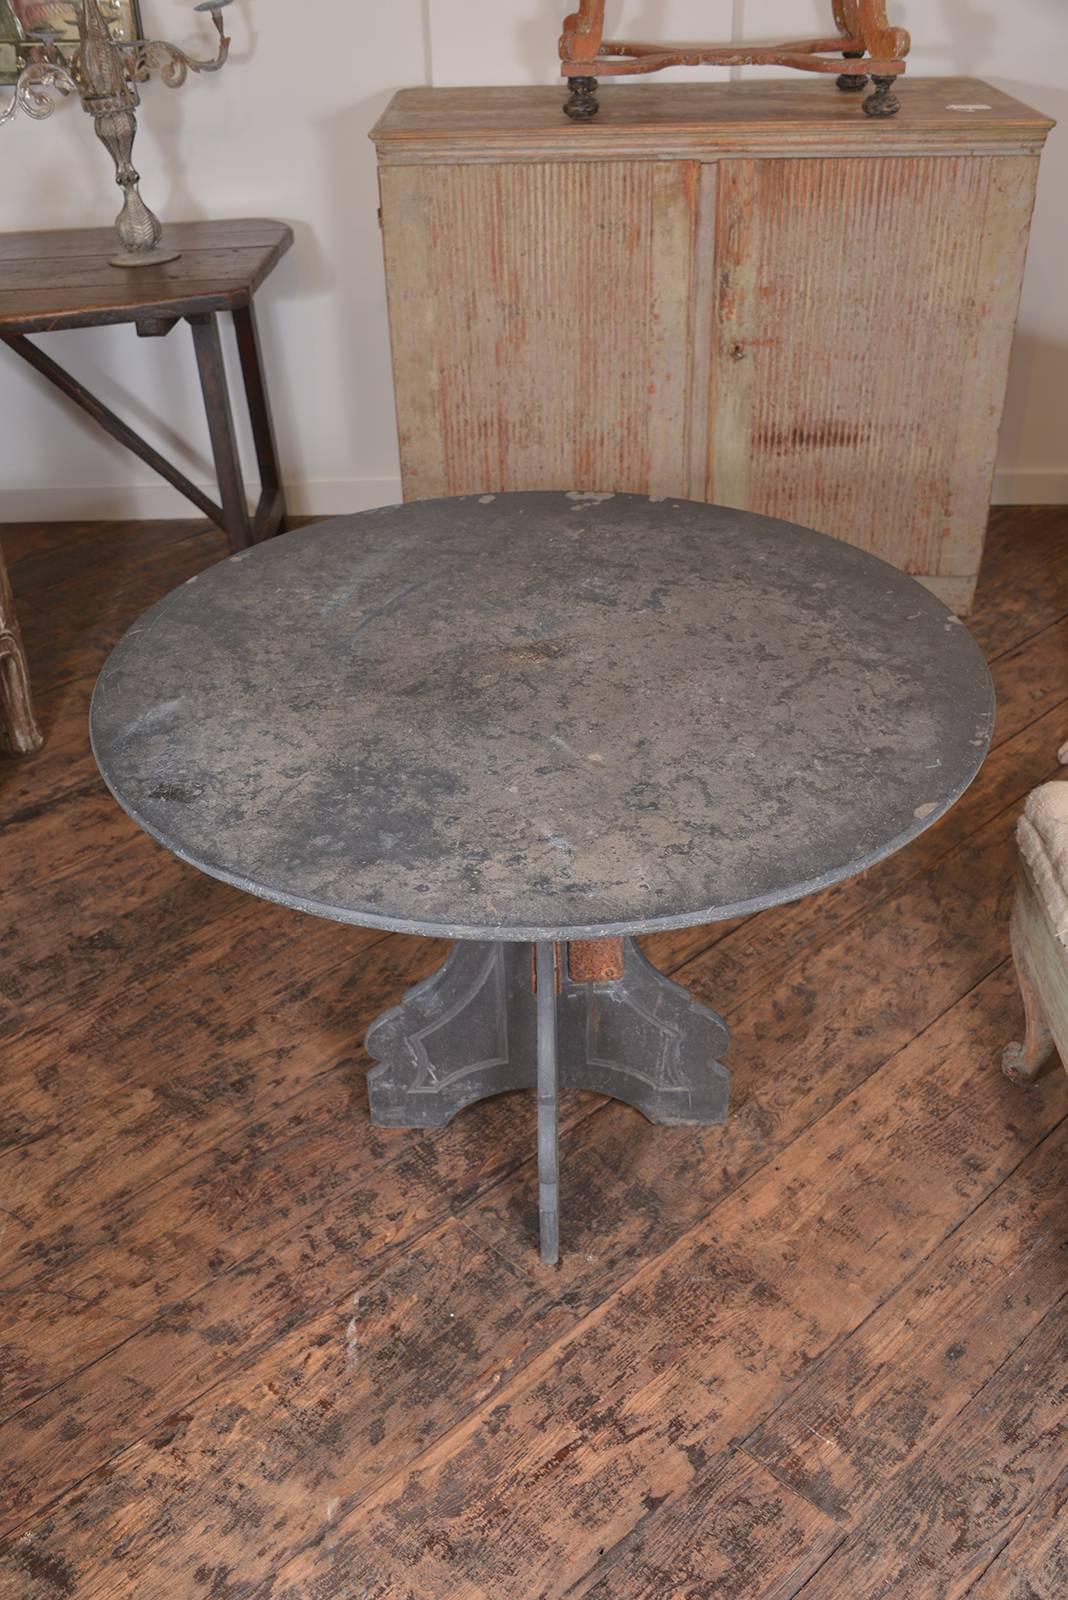 Fabulous round slate table, c 1900. Nice detail on the leg, has an old repair which we think makes it more charming! 